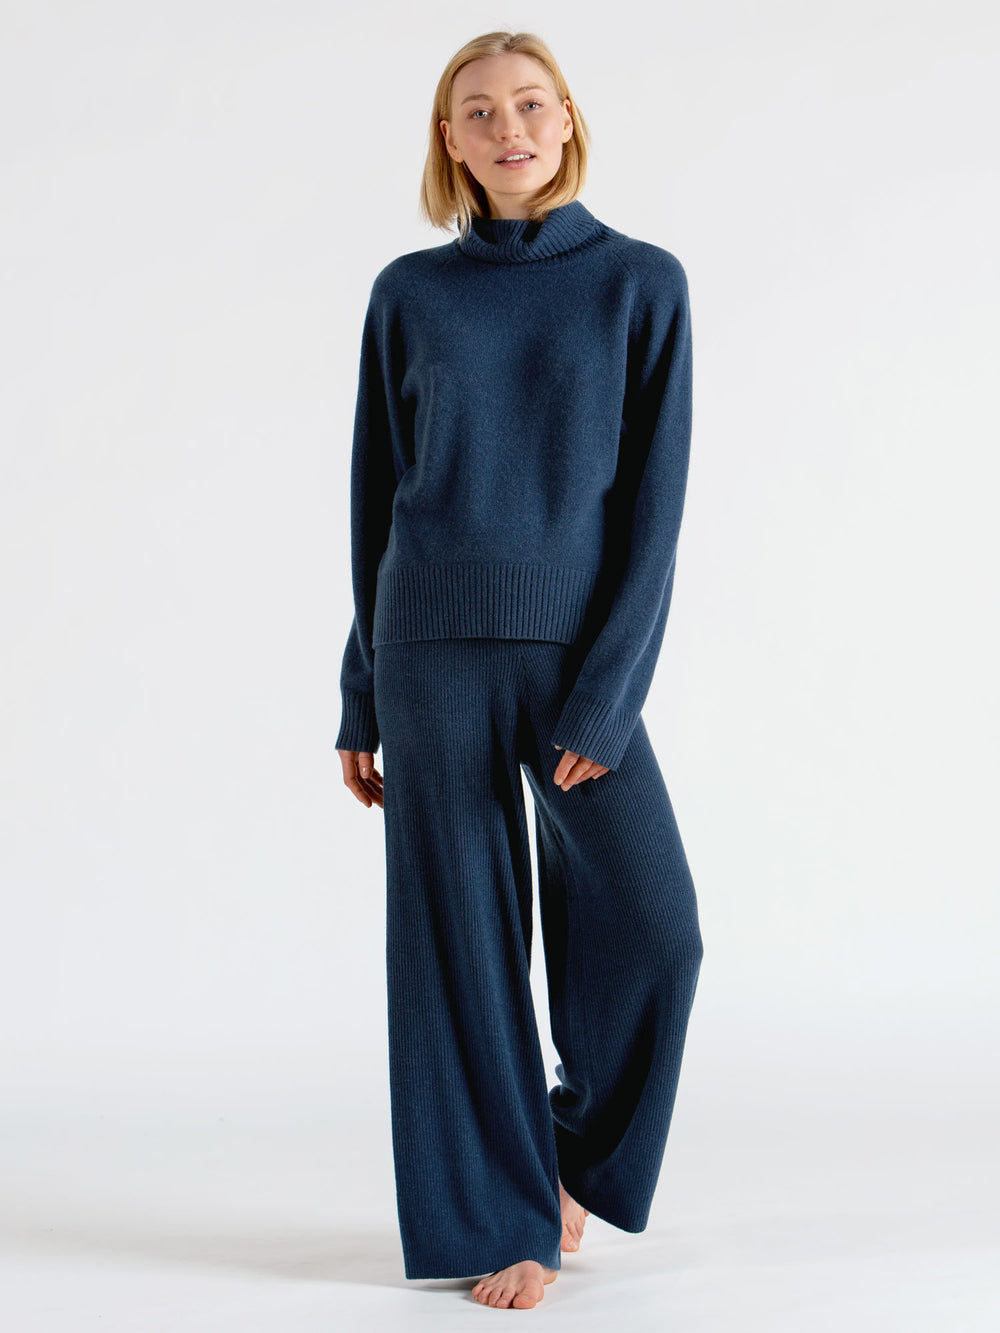 cashmere pants North, mountain blue, 100% cashmere from kashmina, norwegian design